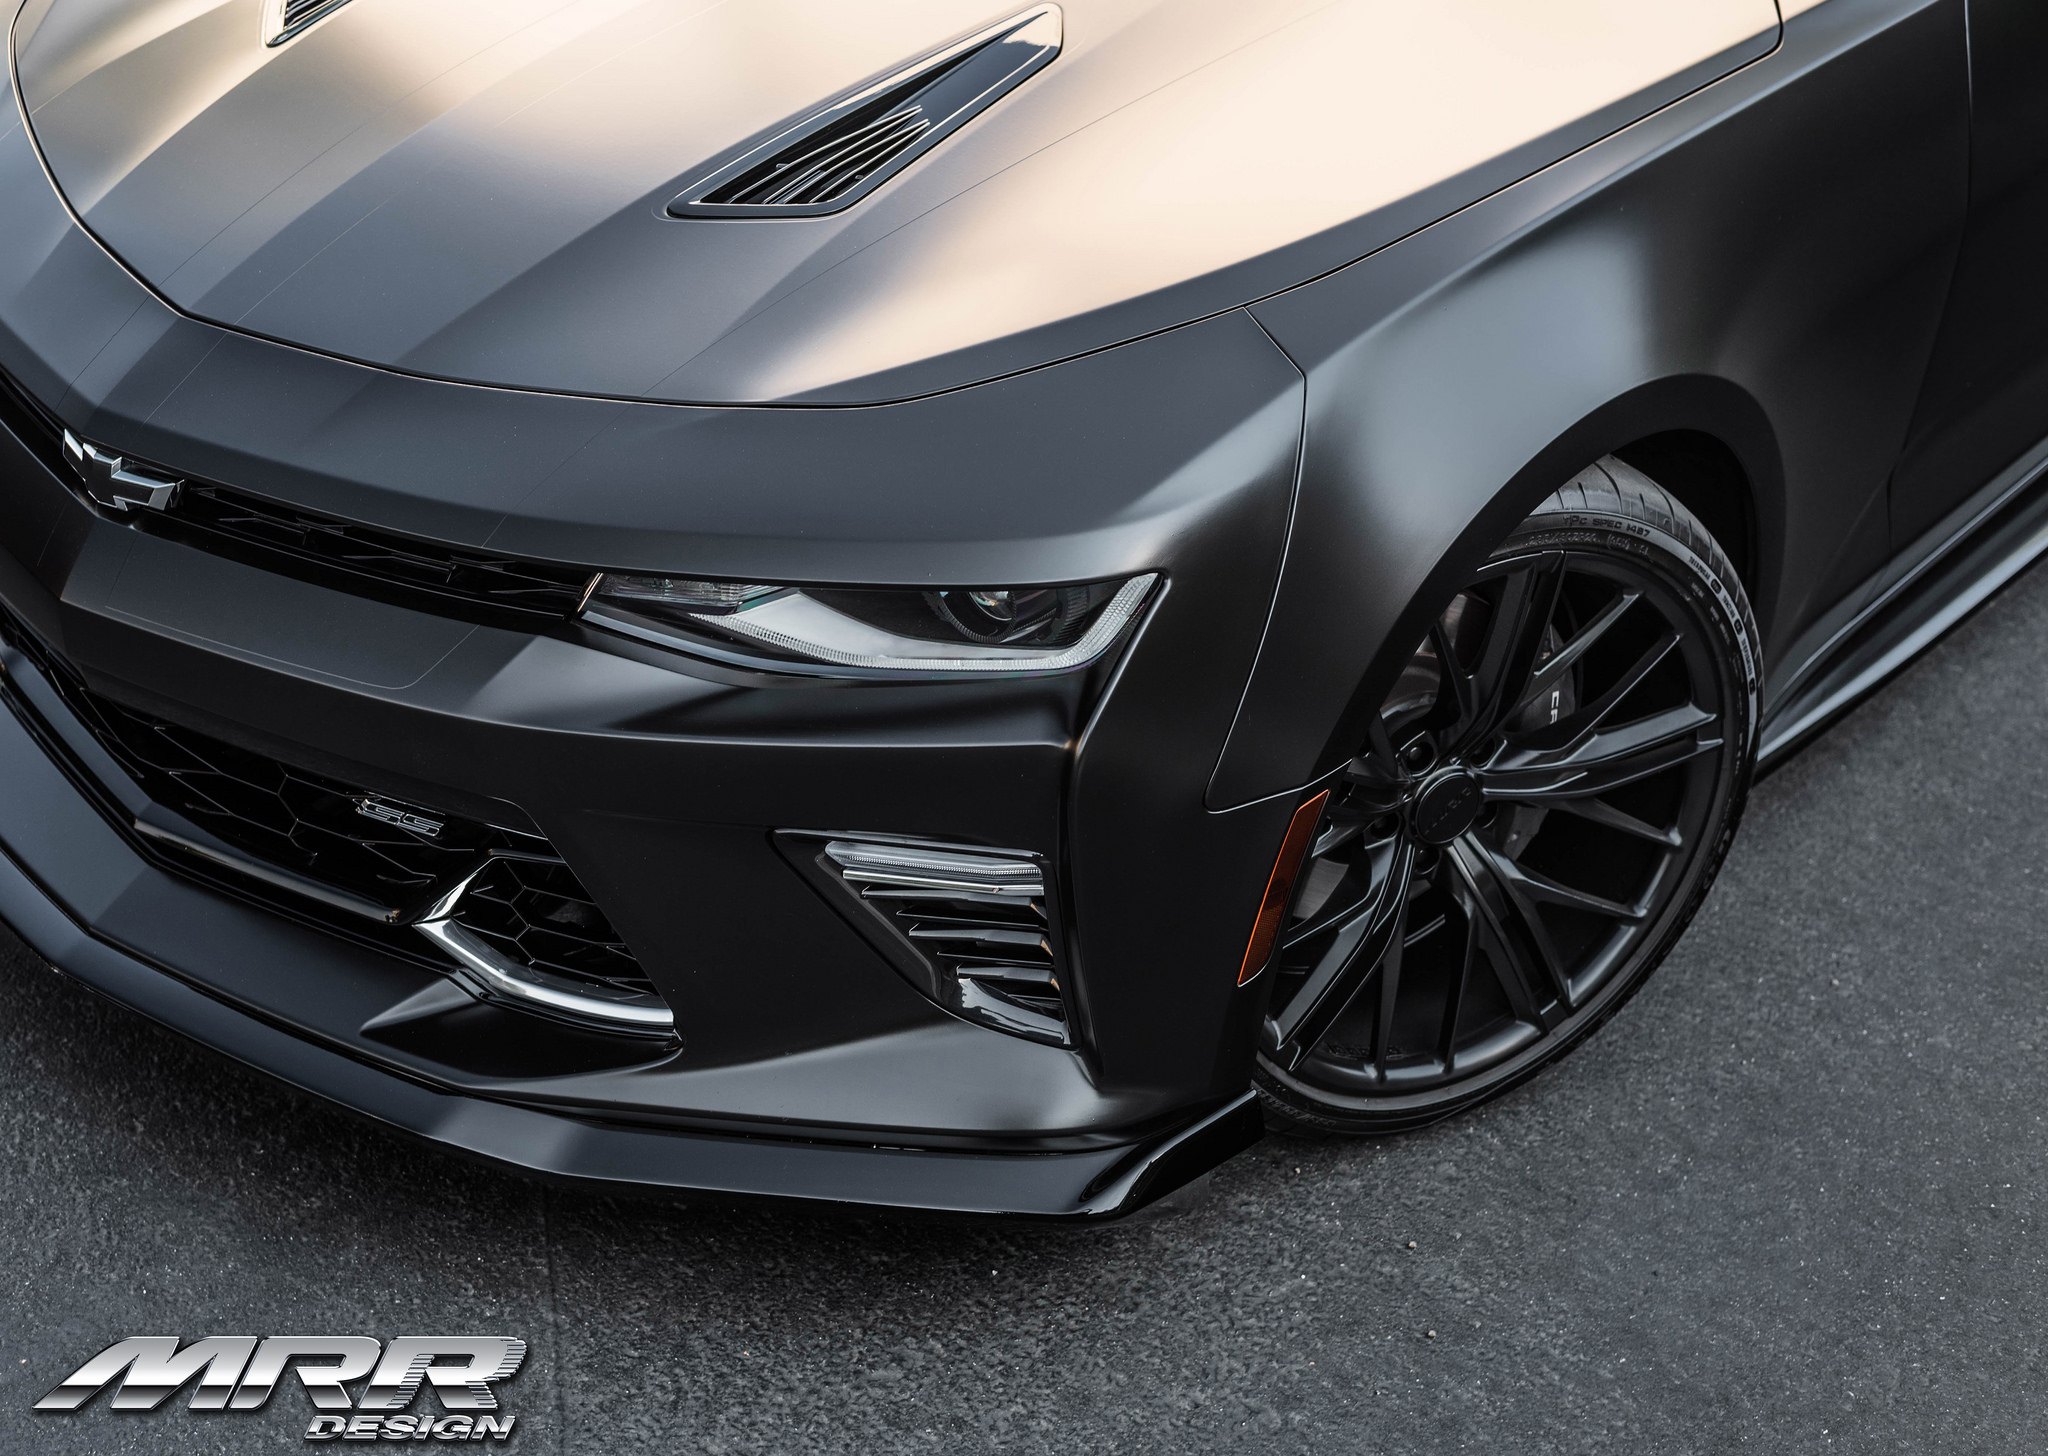 Aftermarket Hood on Black Chevy Camaro - Photo by MRR